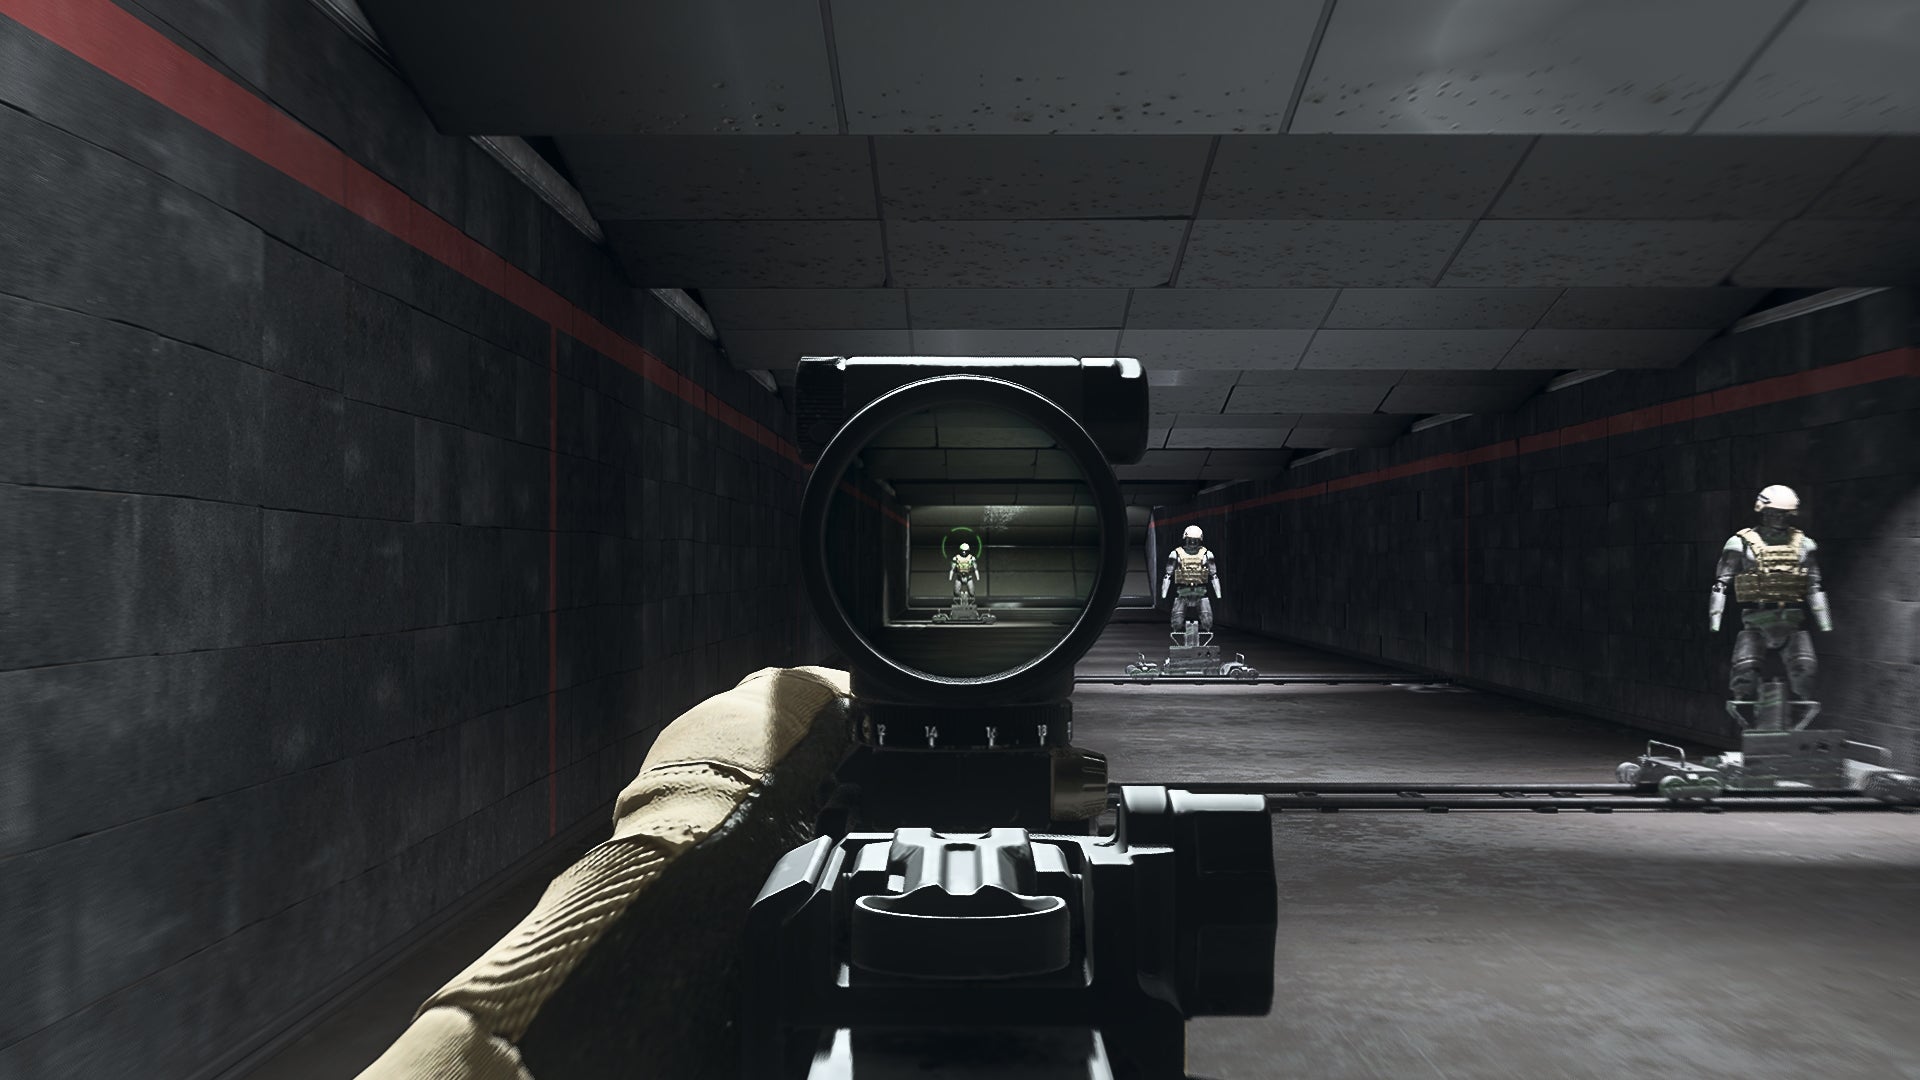 The player in Warzone 2.0 aims at a training dummy using the Kazan Holo optic attachment.